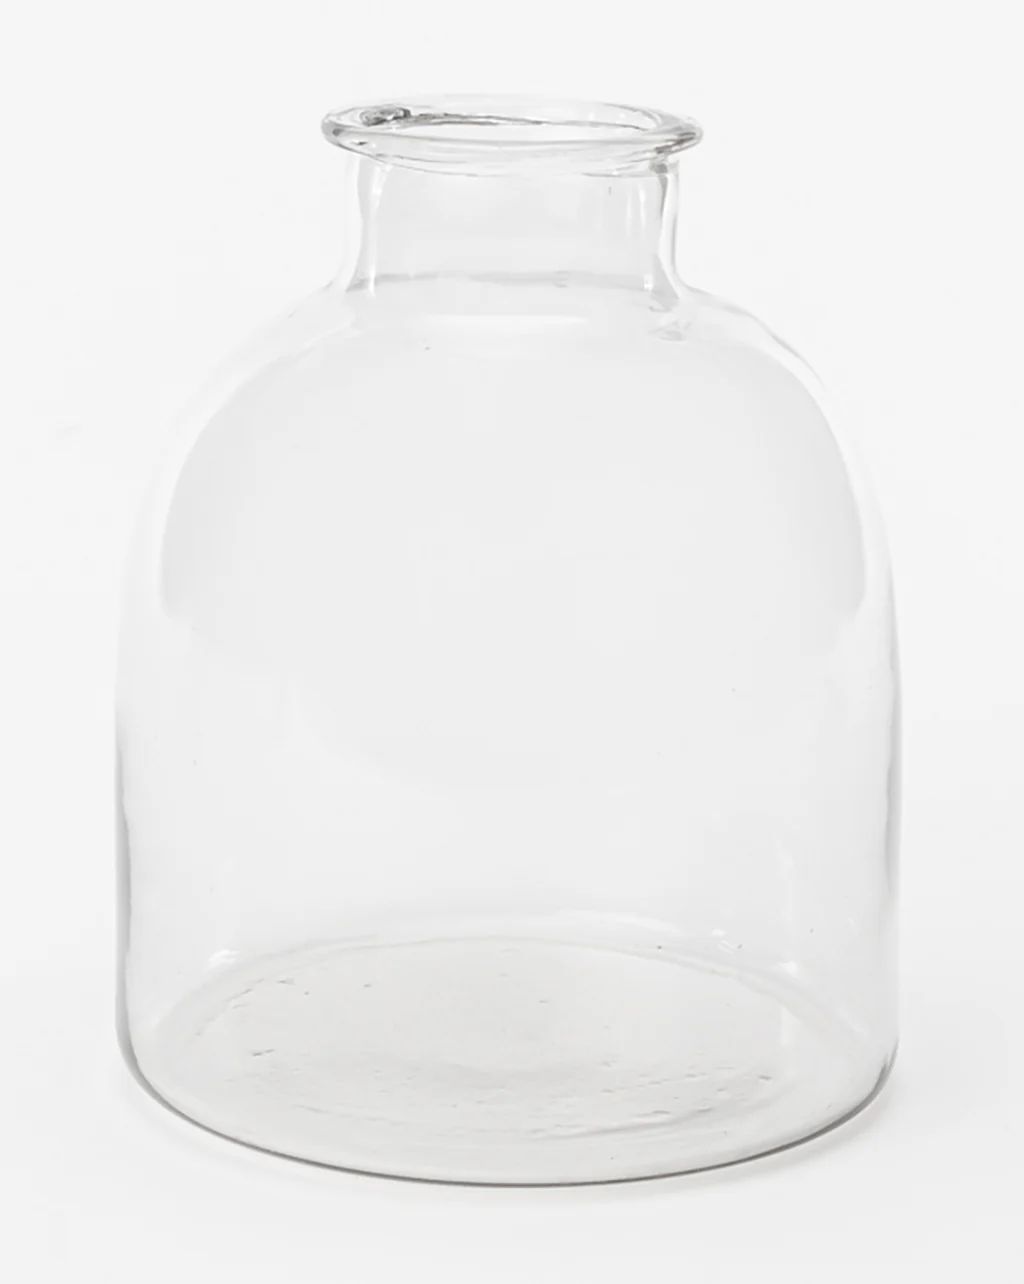 Kelby Glass Vase | McGee & Co. (US)